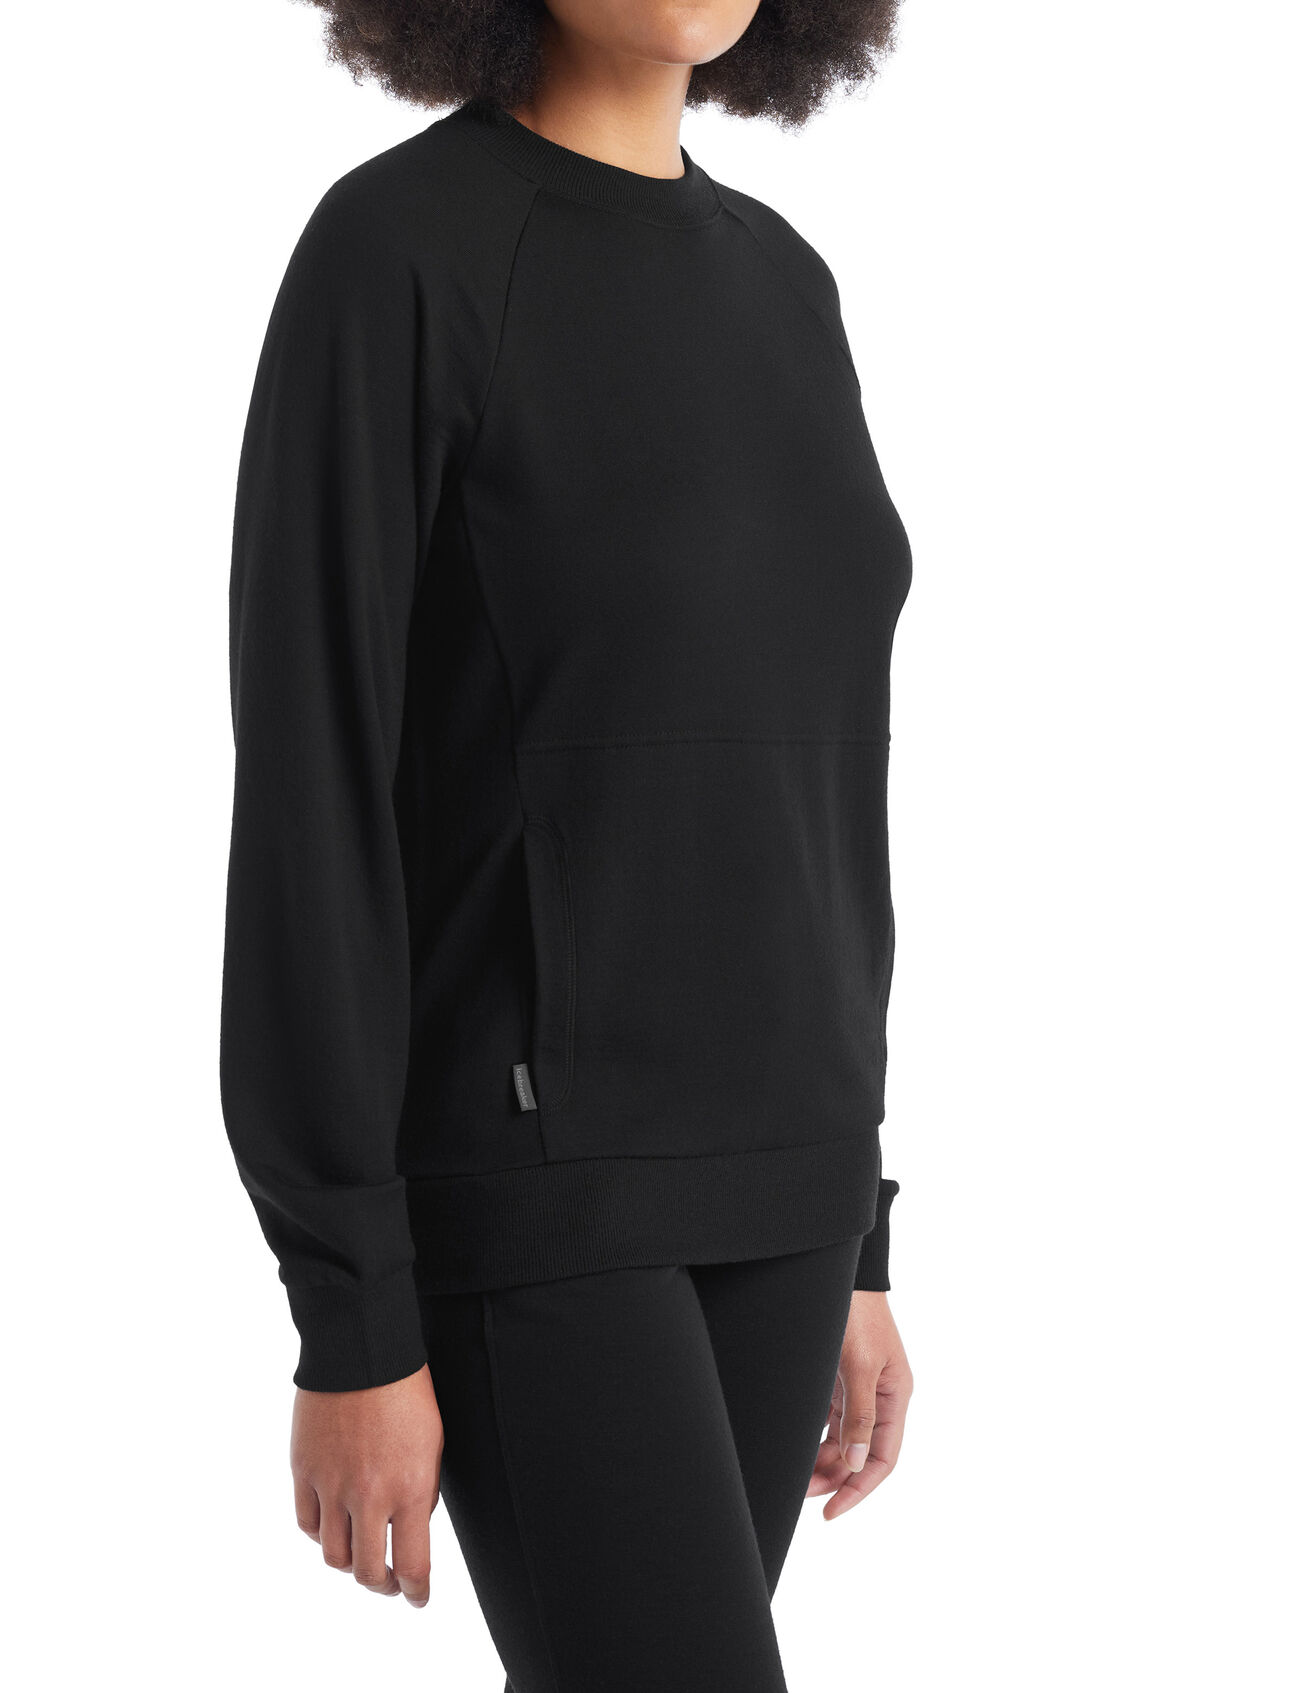 Womens Merino Helliers Terry Long Sleeve Sweatshirt  A classic, everyday sweatshirt ideal for cool-weather layering, the Helliers Terry Long Sleeve Sweatshirt features 100% merino wool terry fabric for super-soft comfort and natural breathability. 